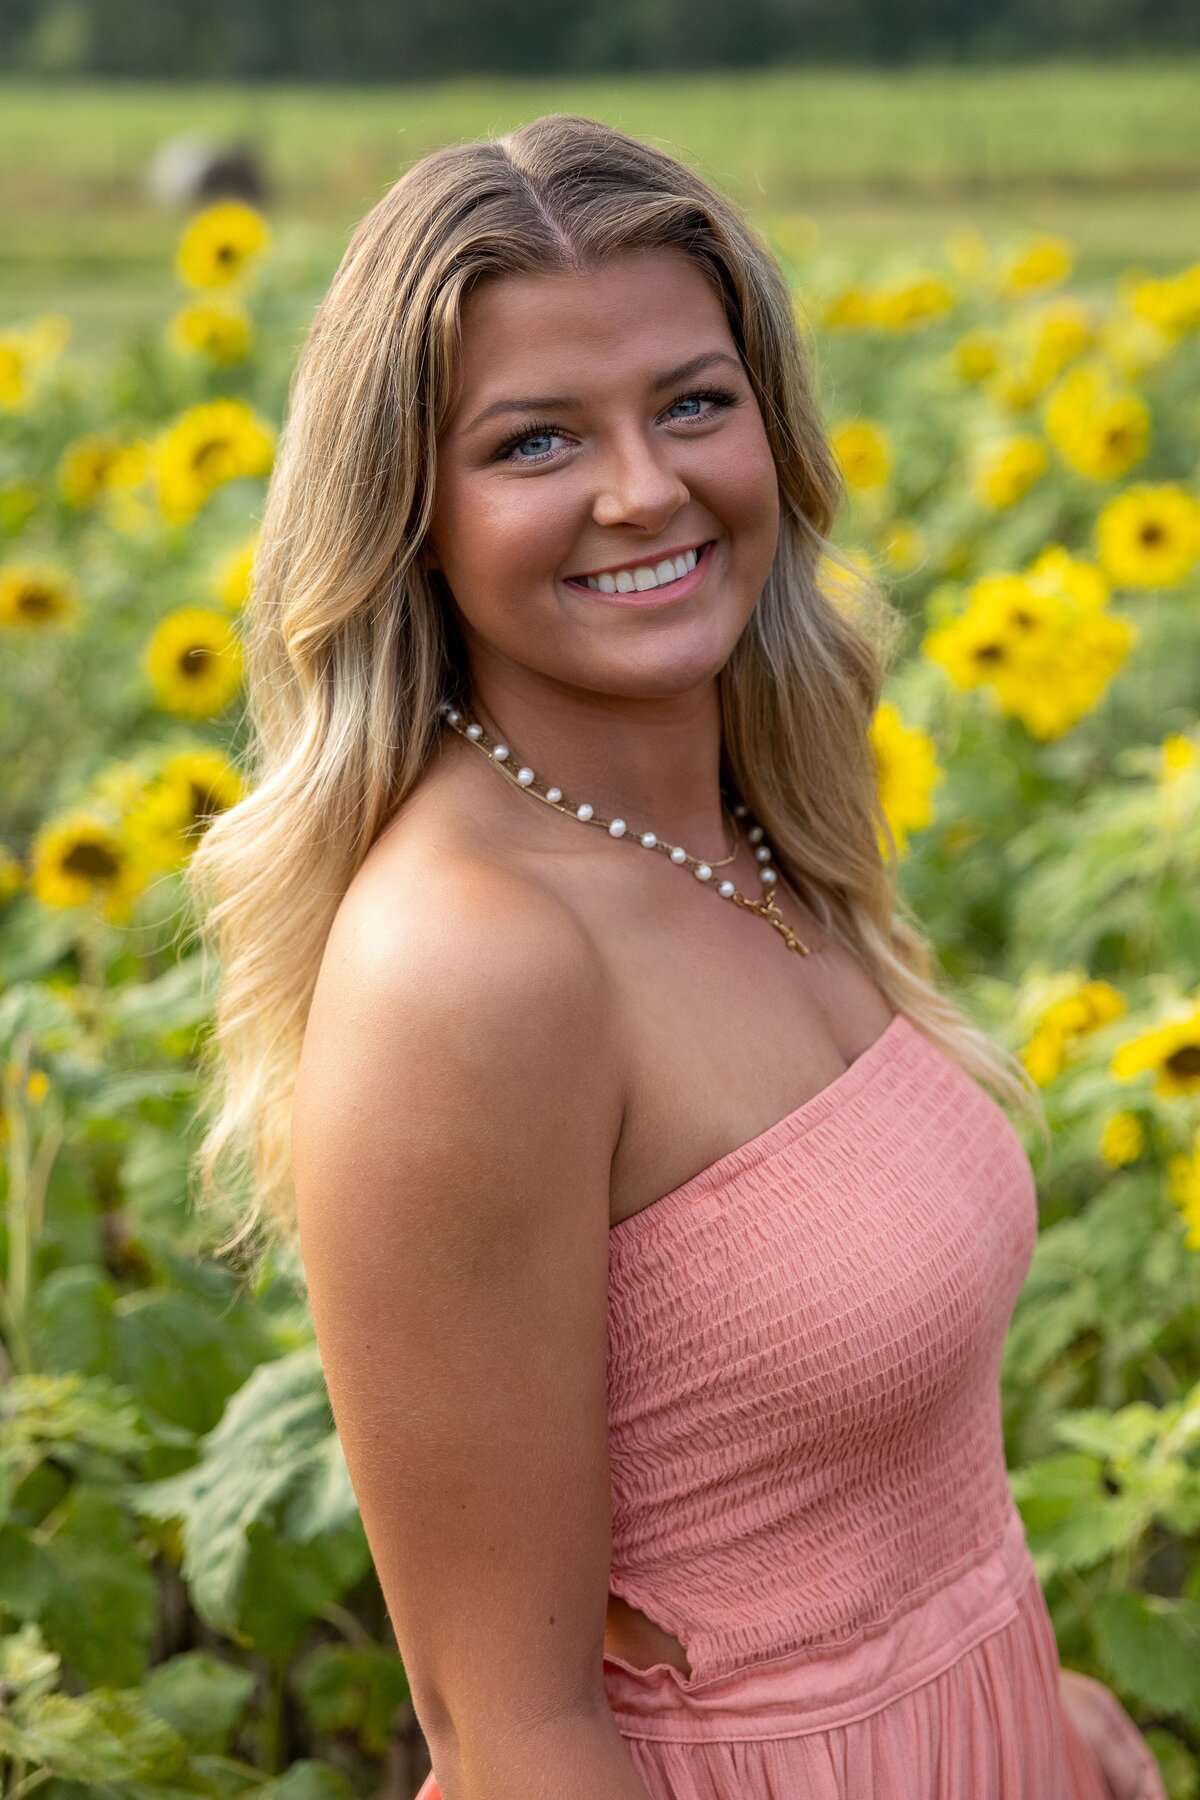 a person smiling in a field of sunflowers